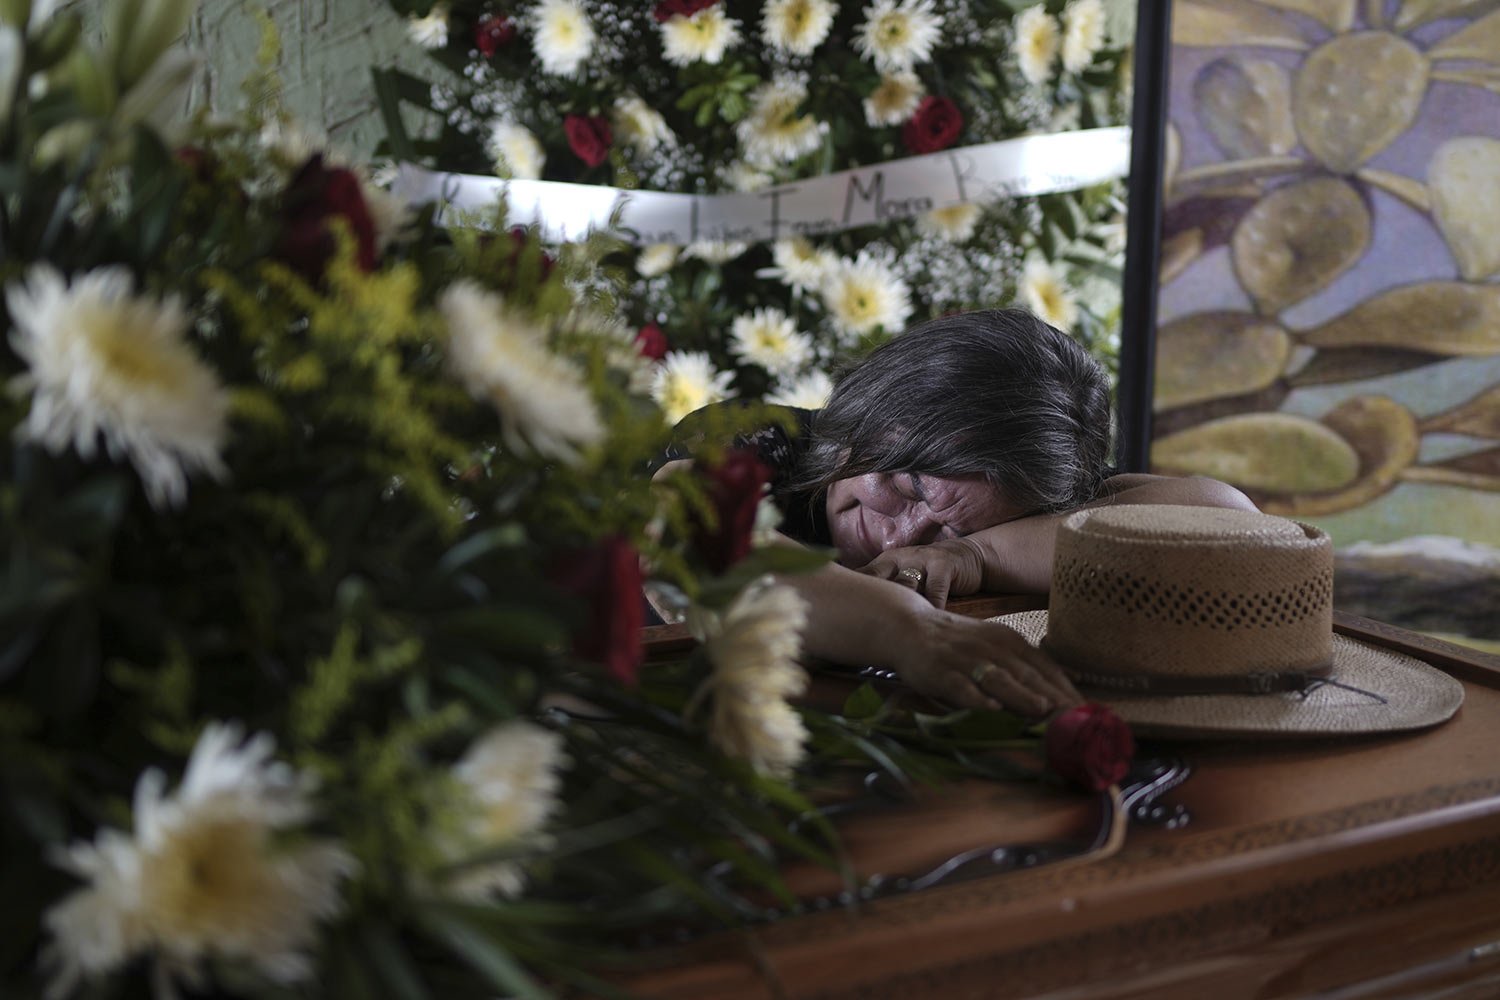  Olivia Mora cries over the casket of her brother Hipolito Mora during his wake at his home in La Ruana, Mexico, June 30, 2023. Hipolito Mora, the leader of an armed civilian movement that once drove a drug cartel out of the western state of Michoaca